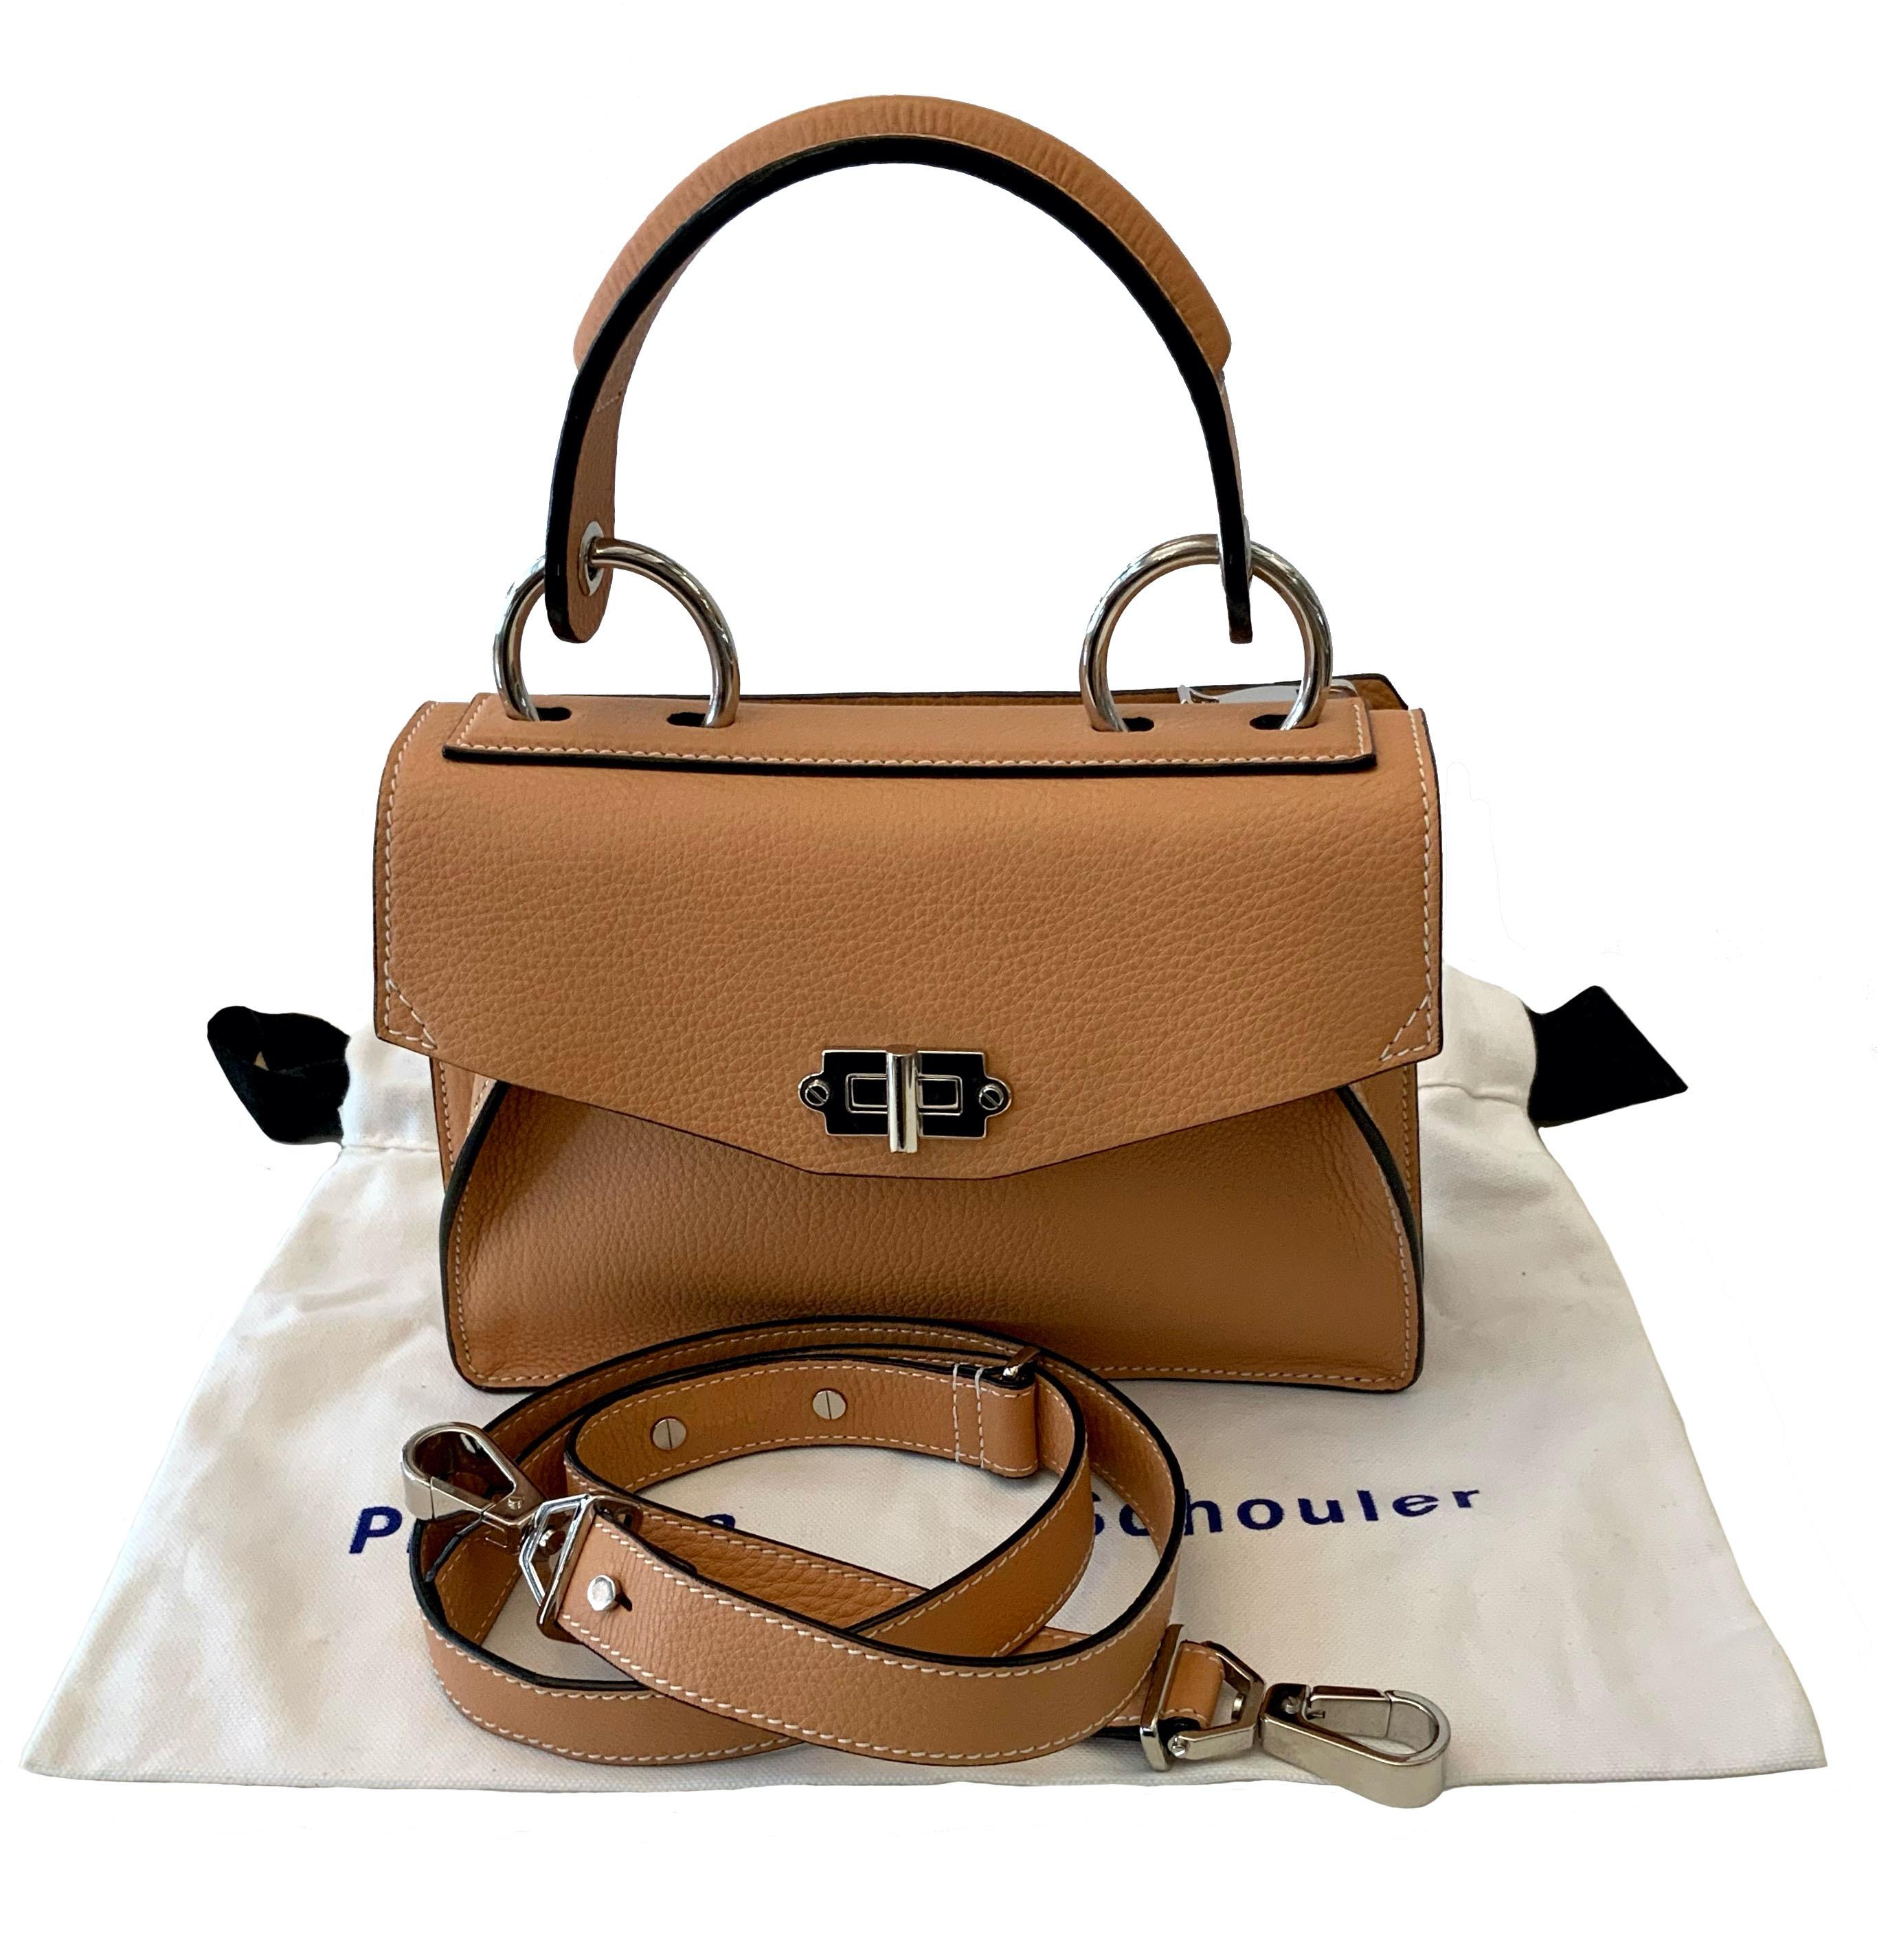 This pre-owned but new Hava Top Handle is crafted in a natural color calfskin leather.
It features custom designed ring hardware and a turnlock closure and signature design elements: topstitching, round studded outlining, folded gusset structure. It